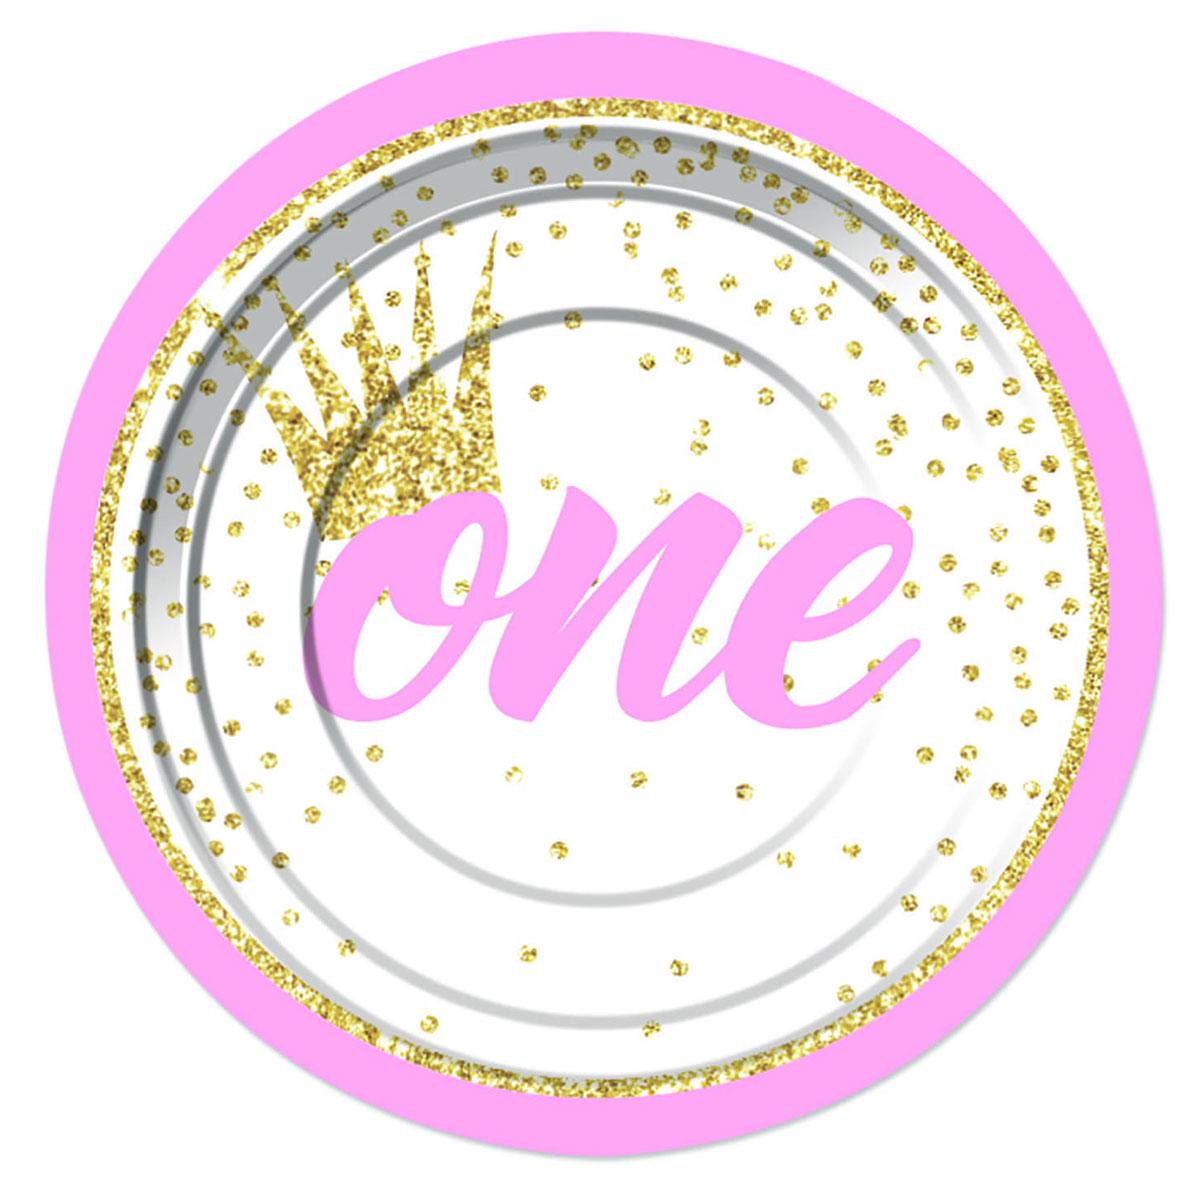 Baby's 1st Birthday 17cm (7") paper plates in white and pink with golden sparkle by Forum Novelties 79814 available here at Karnival Costumes online party shop